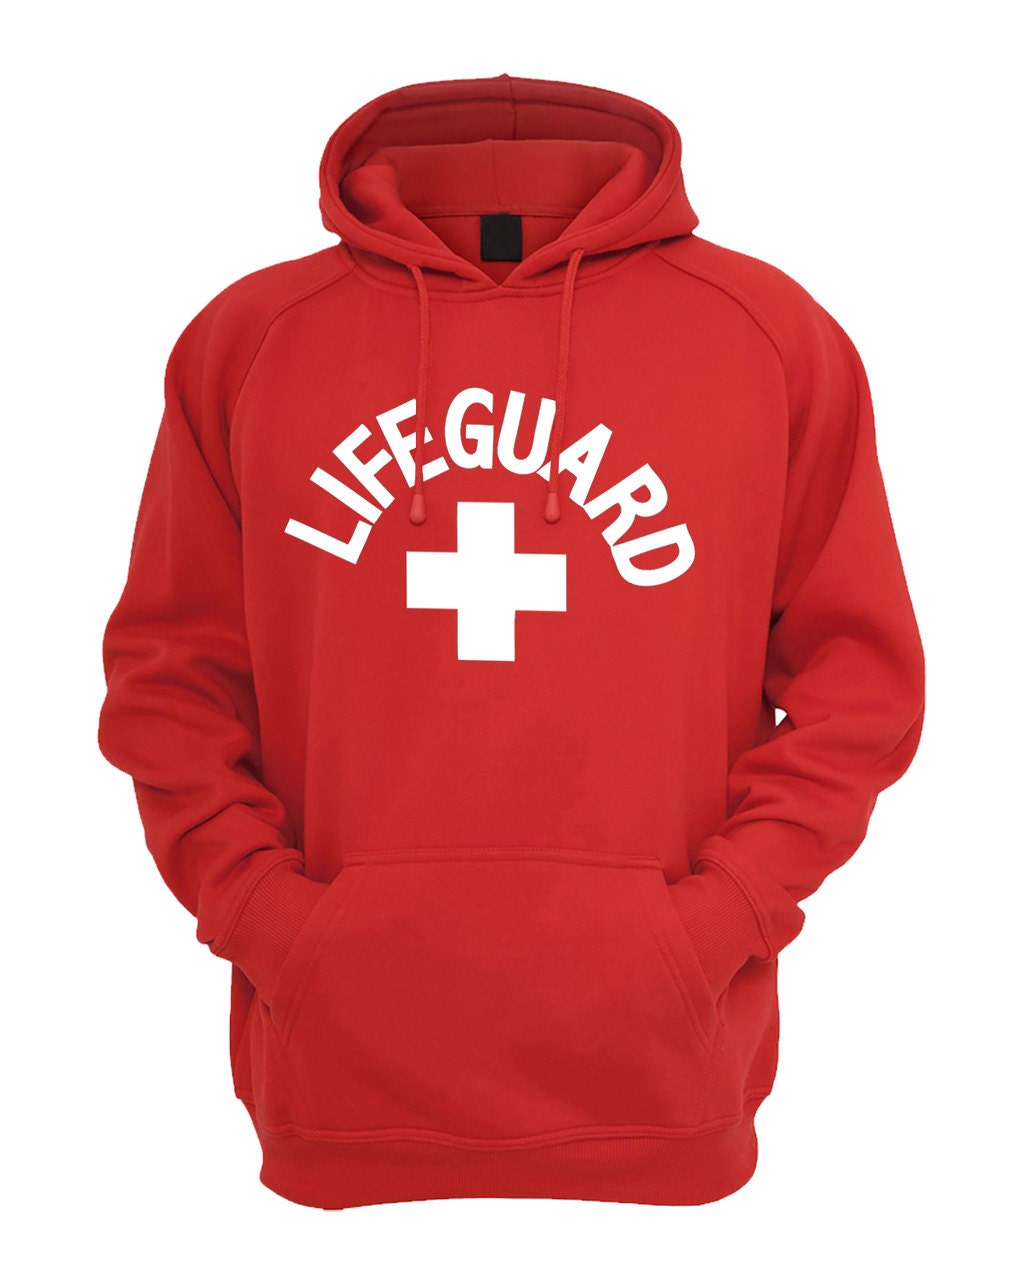 Lifeguard White Design Unisex Hoodie Pullover Hoodies for | Etsy